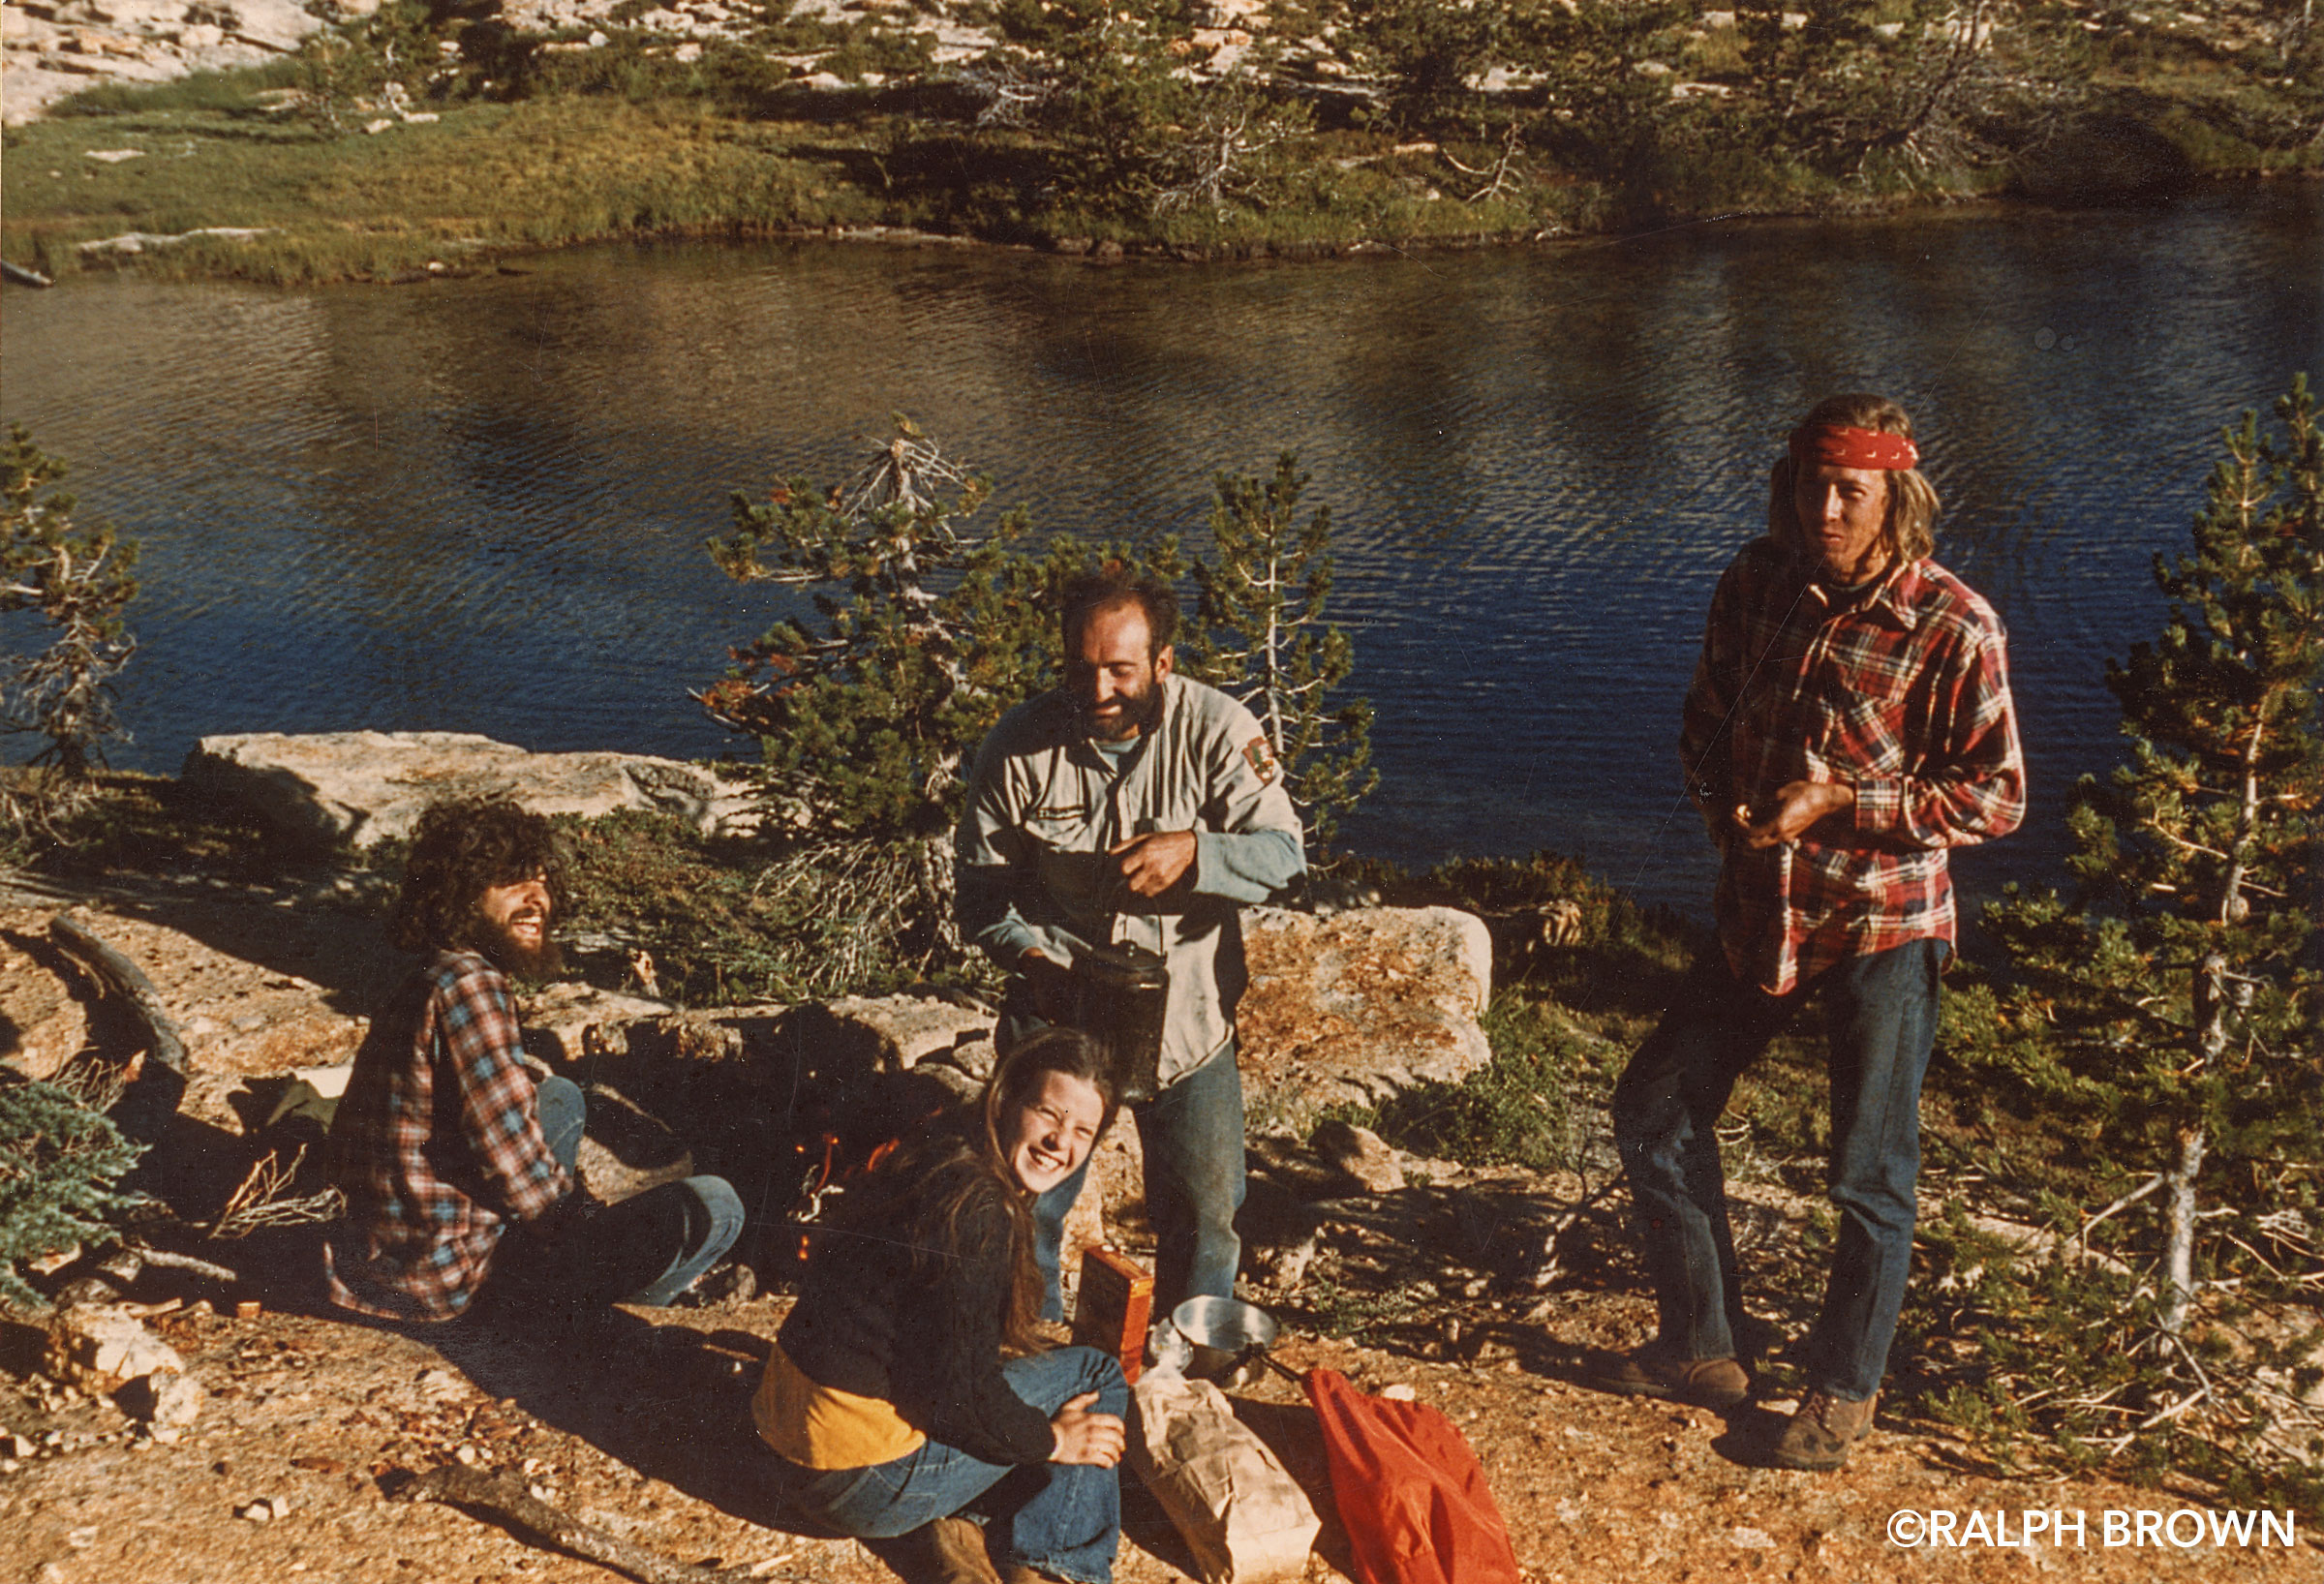 Breaktime on the trail. Yosemite National Park, California. (L to R): Jack Knieriemen and Larry Roberts. Summer, 1973.